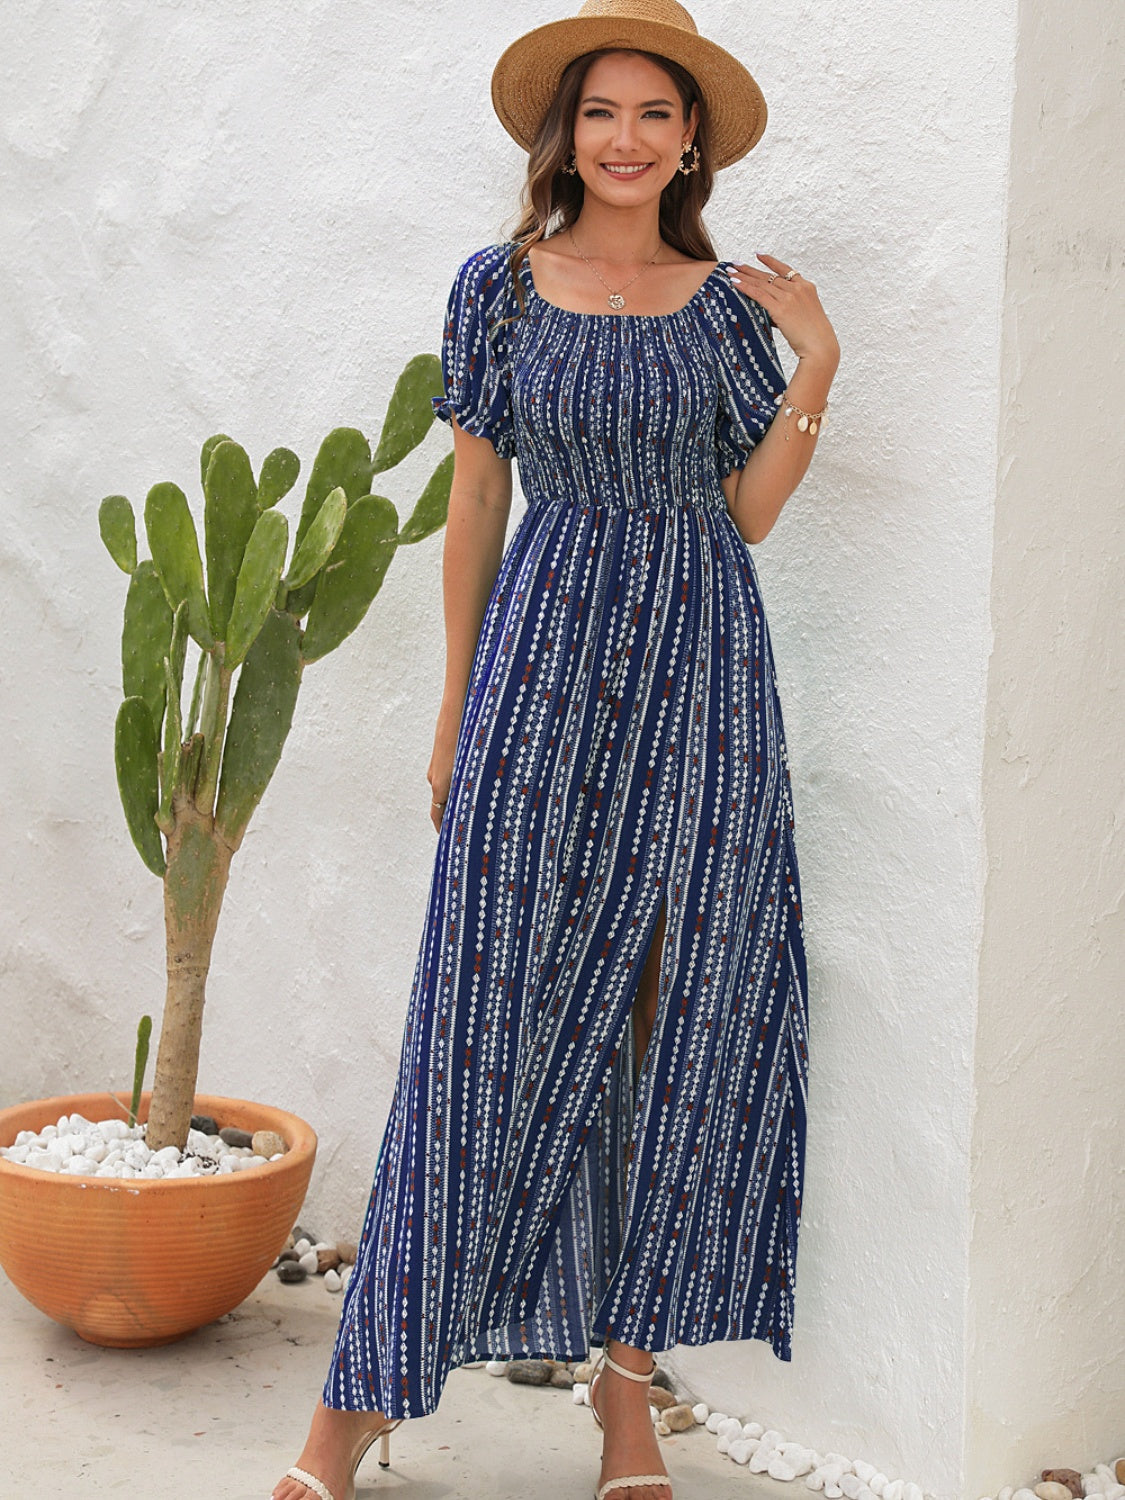 Elegant Mexico Wedding Guest Dresses: Stylish Slit Printed Short Sleeve Dress for Memorable Celebrations – Perfect for Beach or Garden Venues